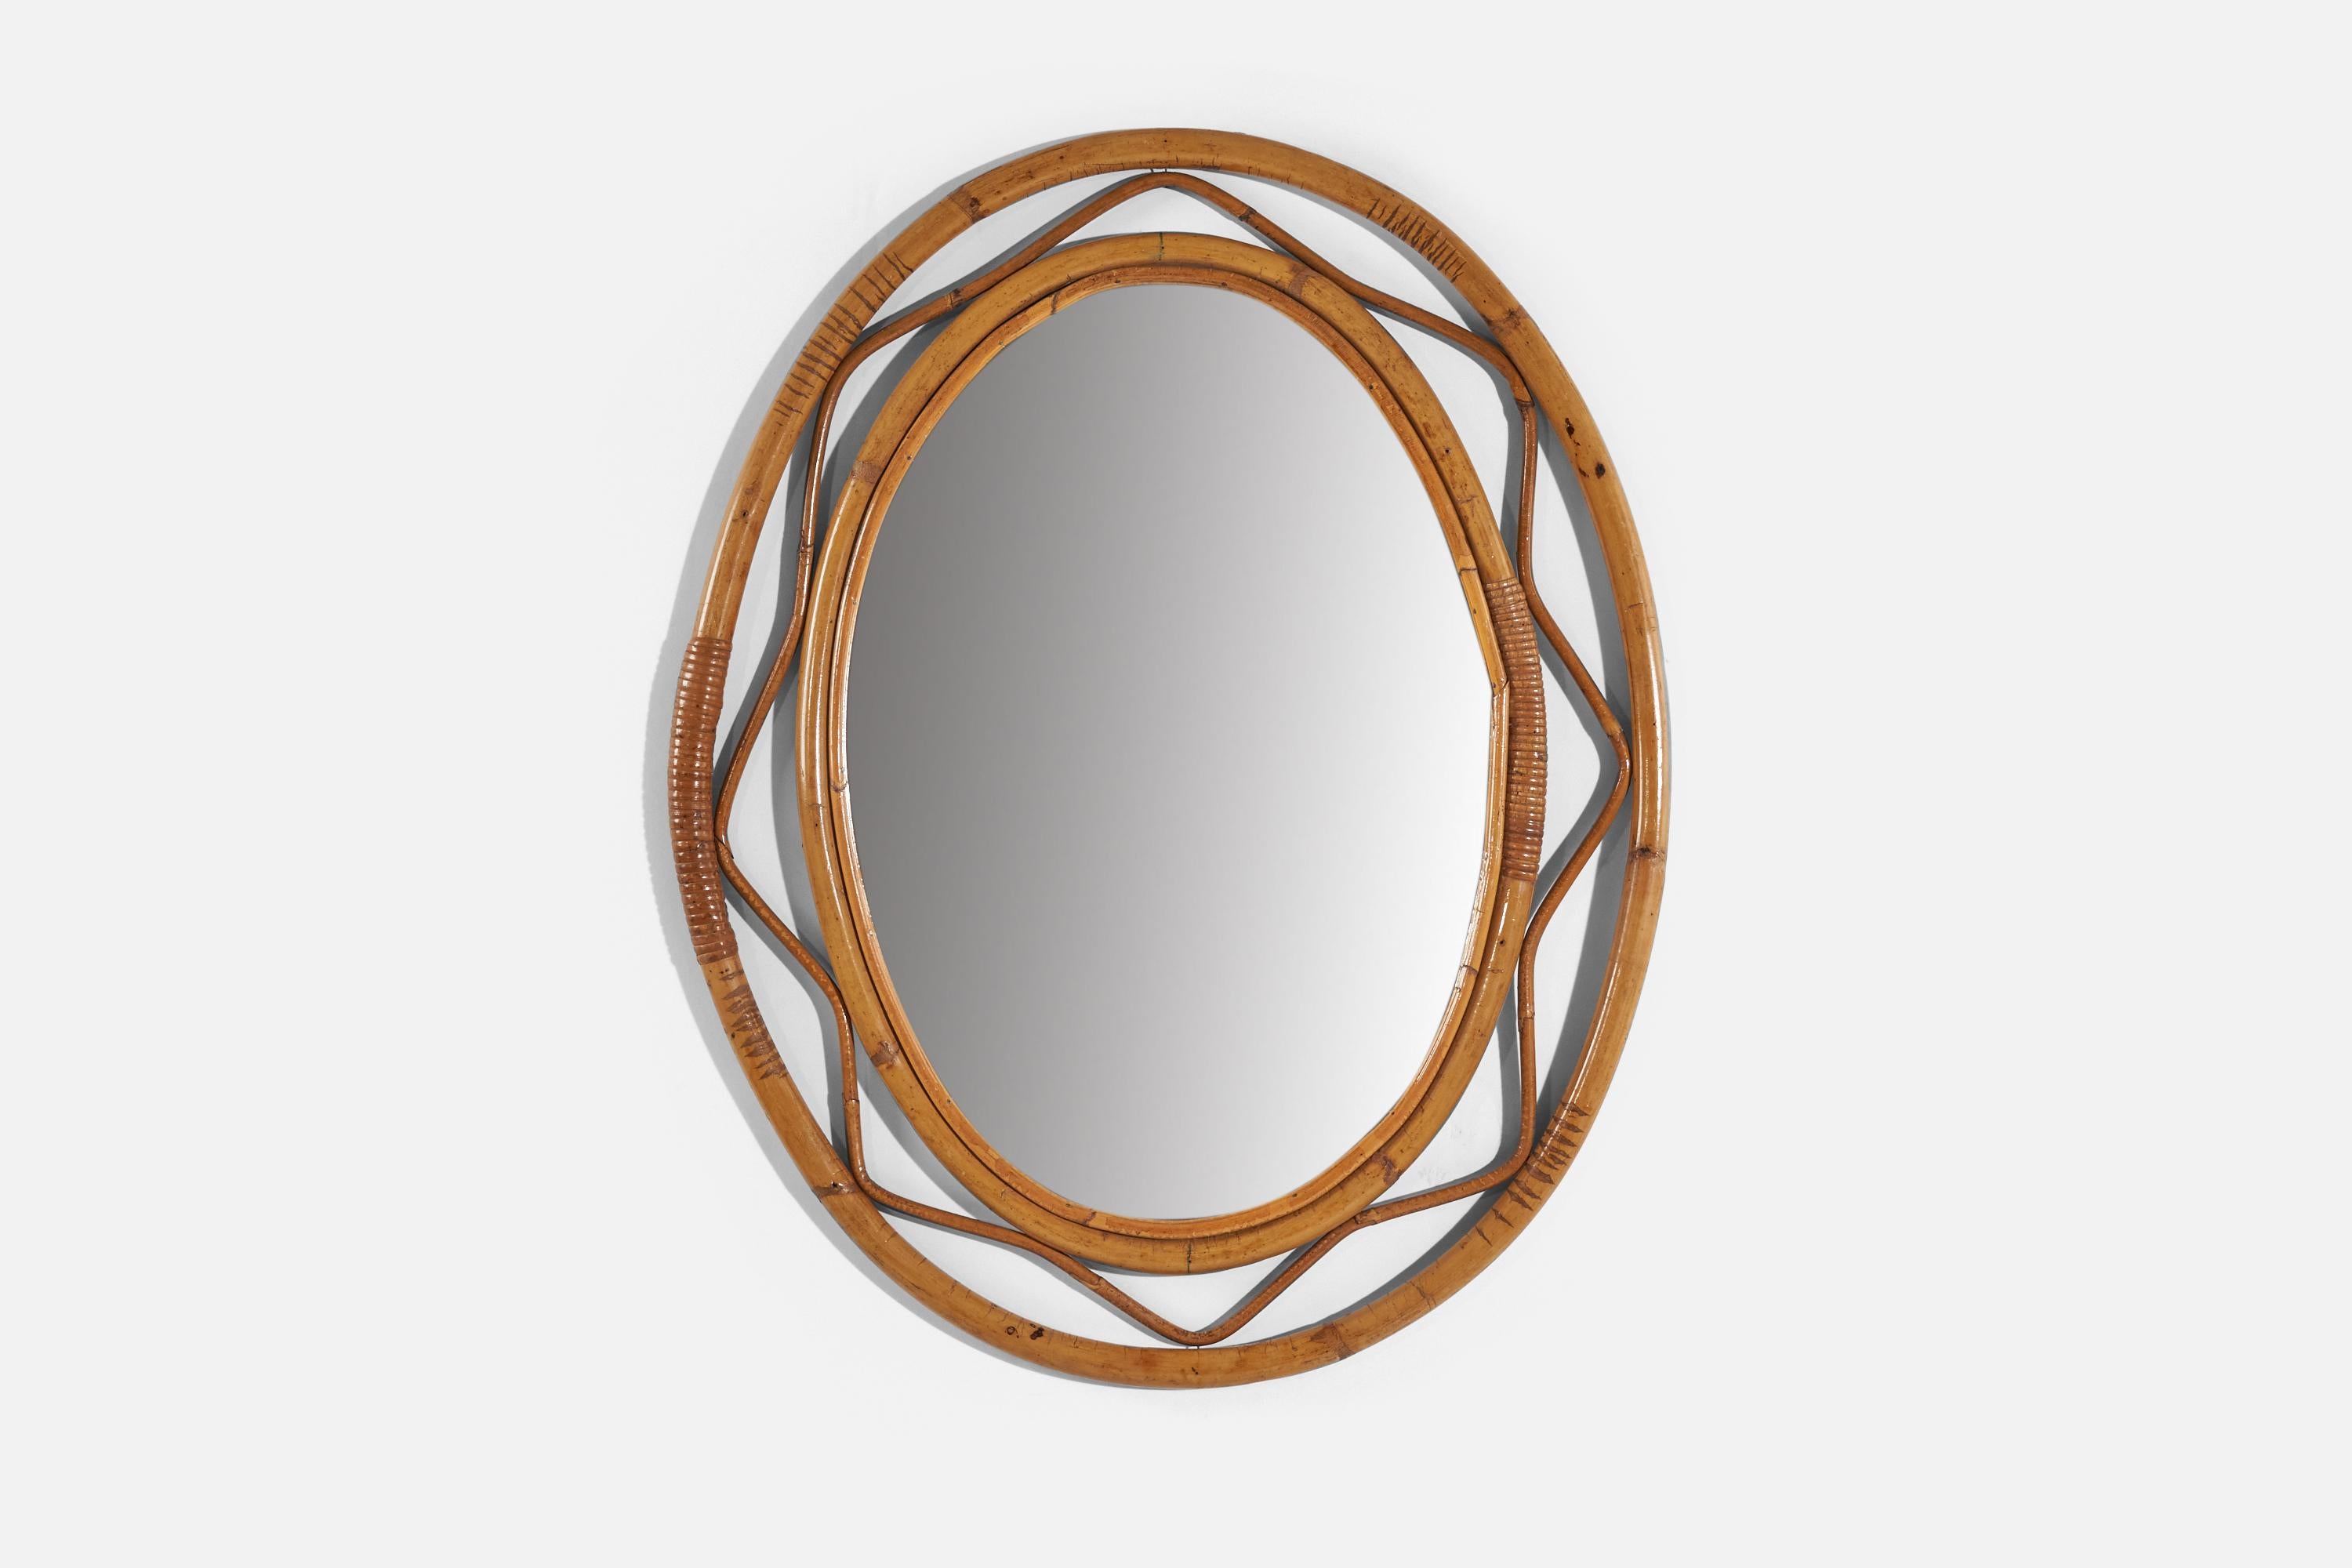 An oval, rattan wall mirror designed and produced by an Italian designer, Italy, 1950s-1960s.
    